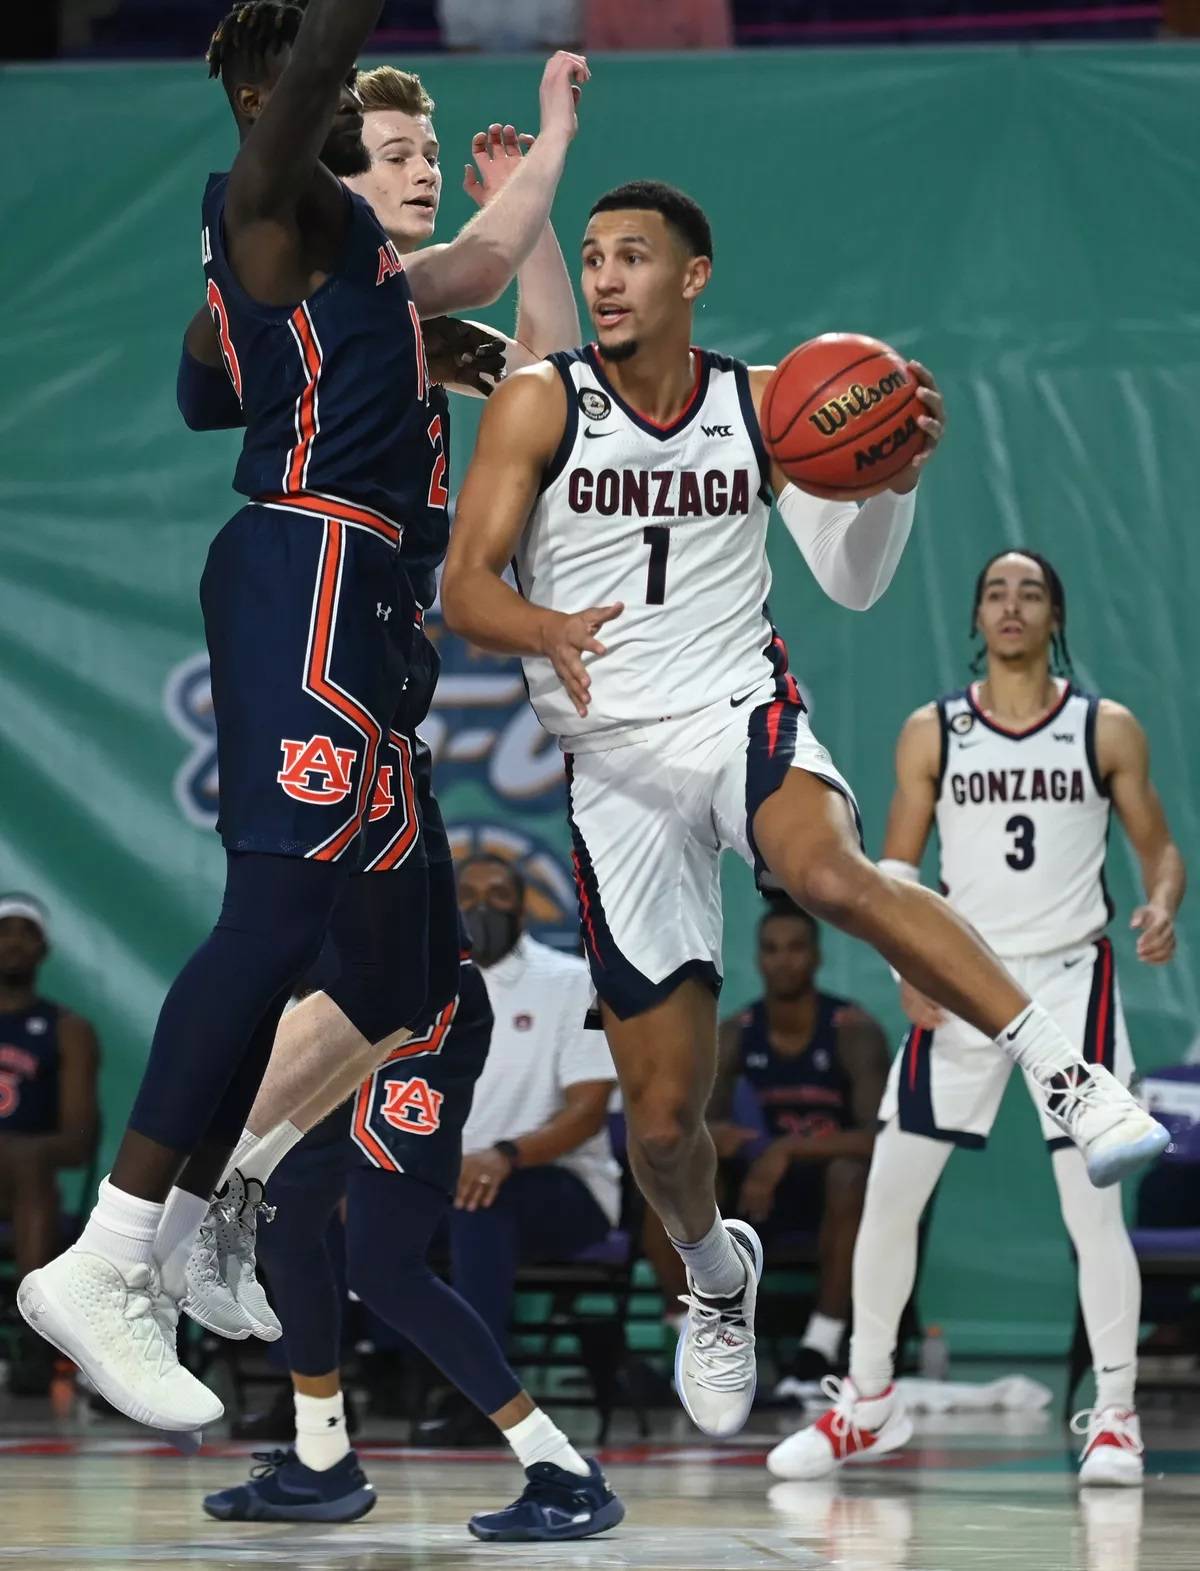 Gonzaga guard Jalen Suggs (1) passes to a teammate against Auburn on Nov. 27, 2020, at the Fort Myers Tip-Off in Fort Myers, Florida. (Chris Tilley/Fort Myers Tip-Off via McClatchy News Service)